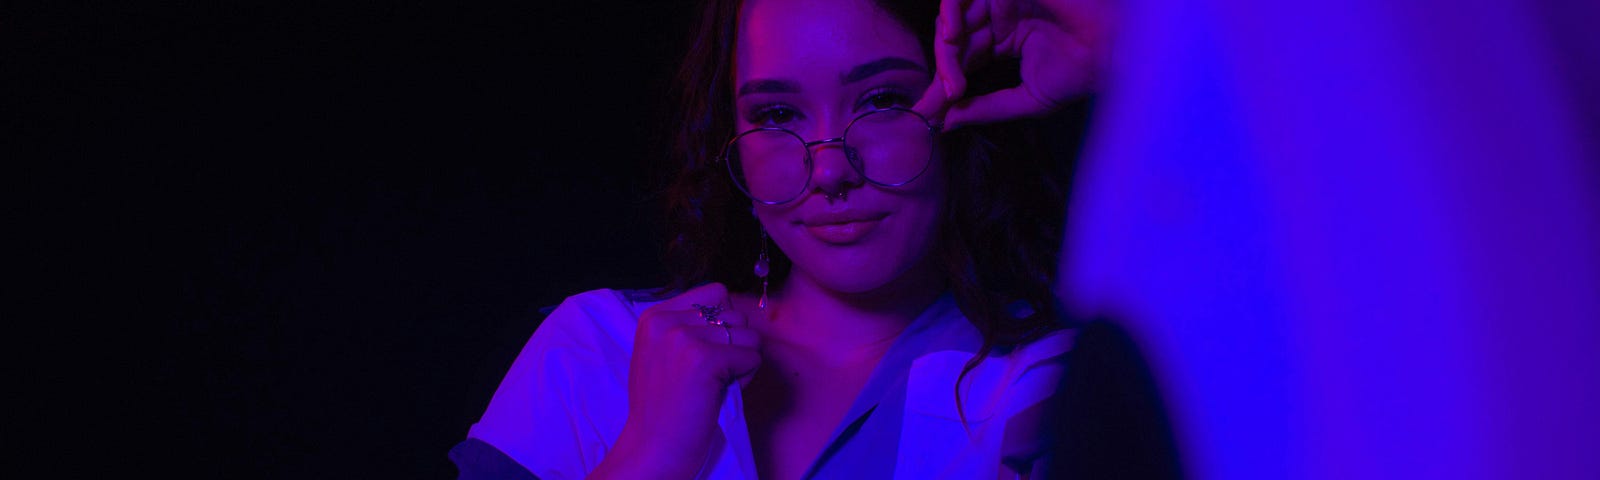 Young woman wearing glasses in purple light